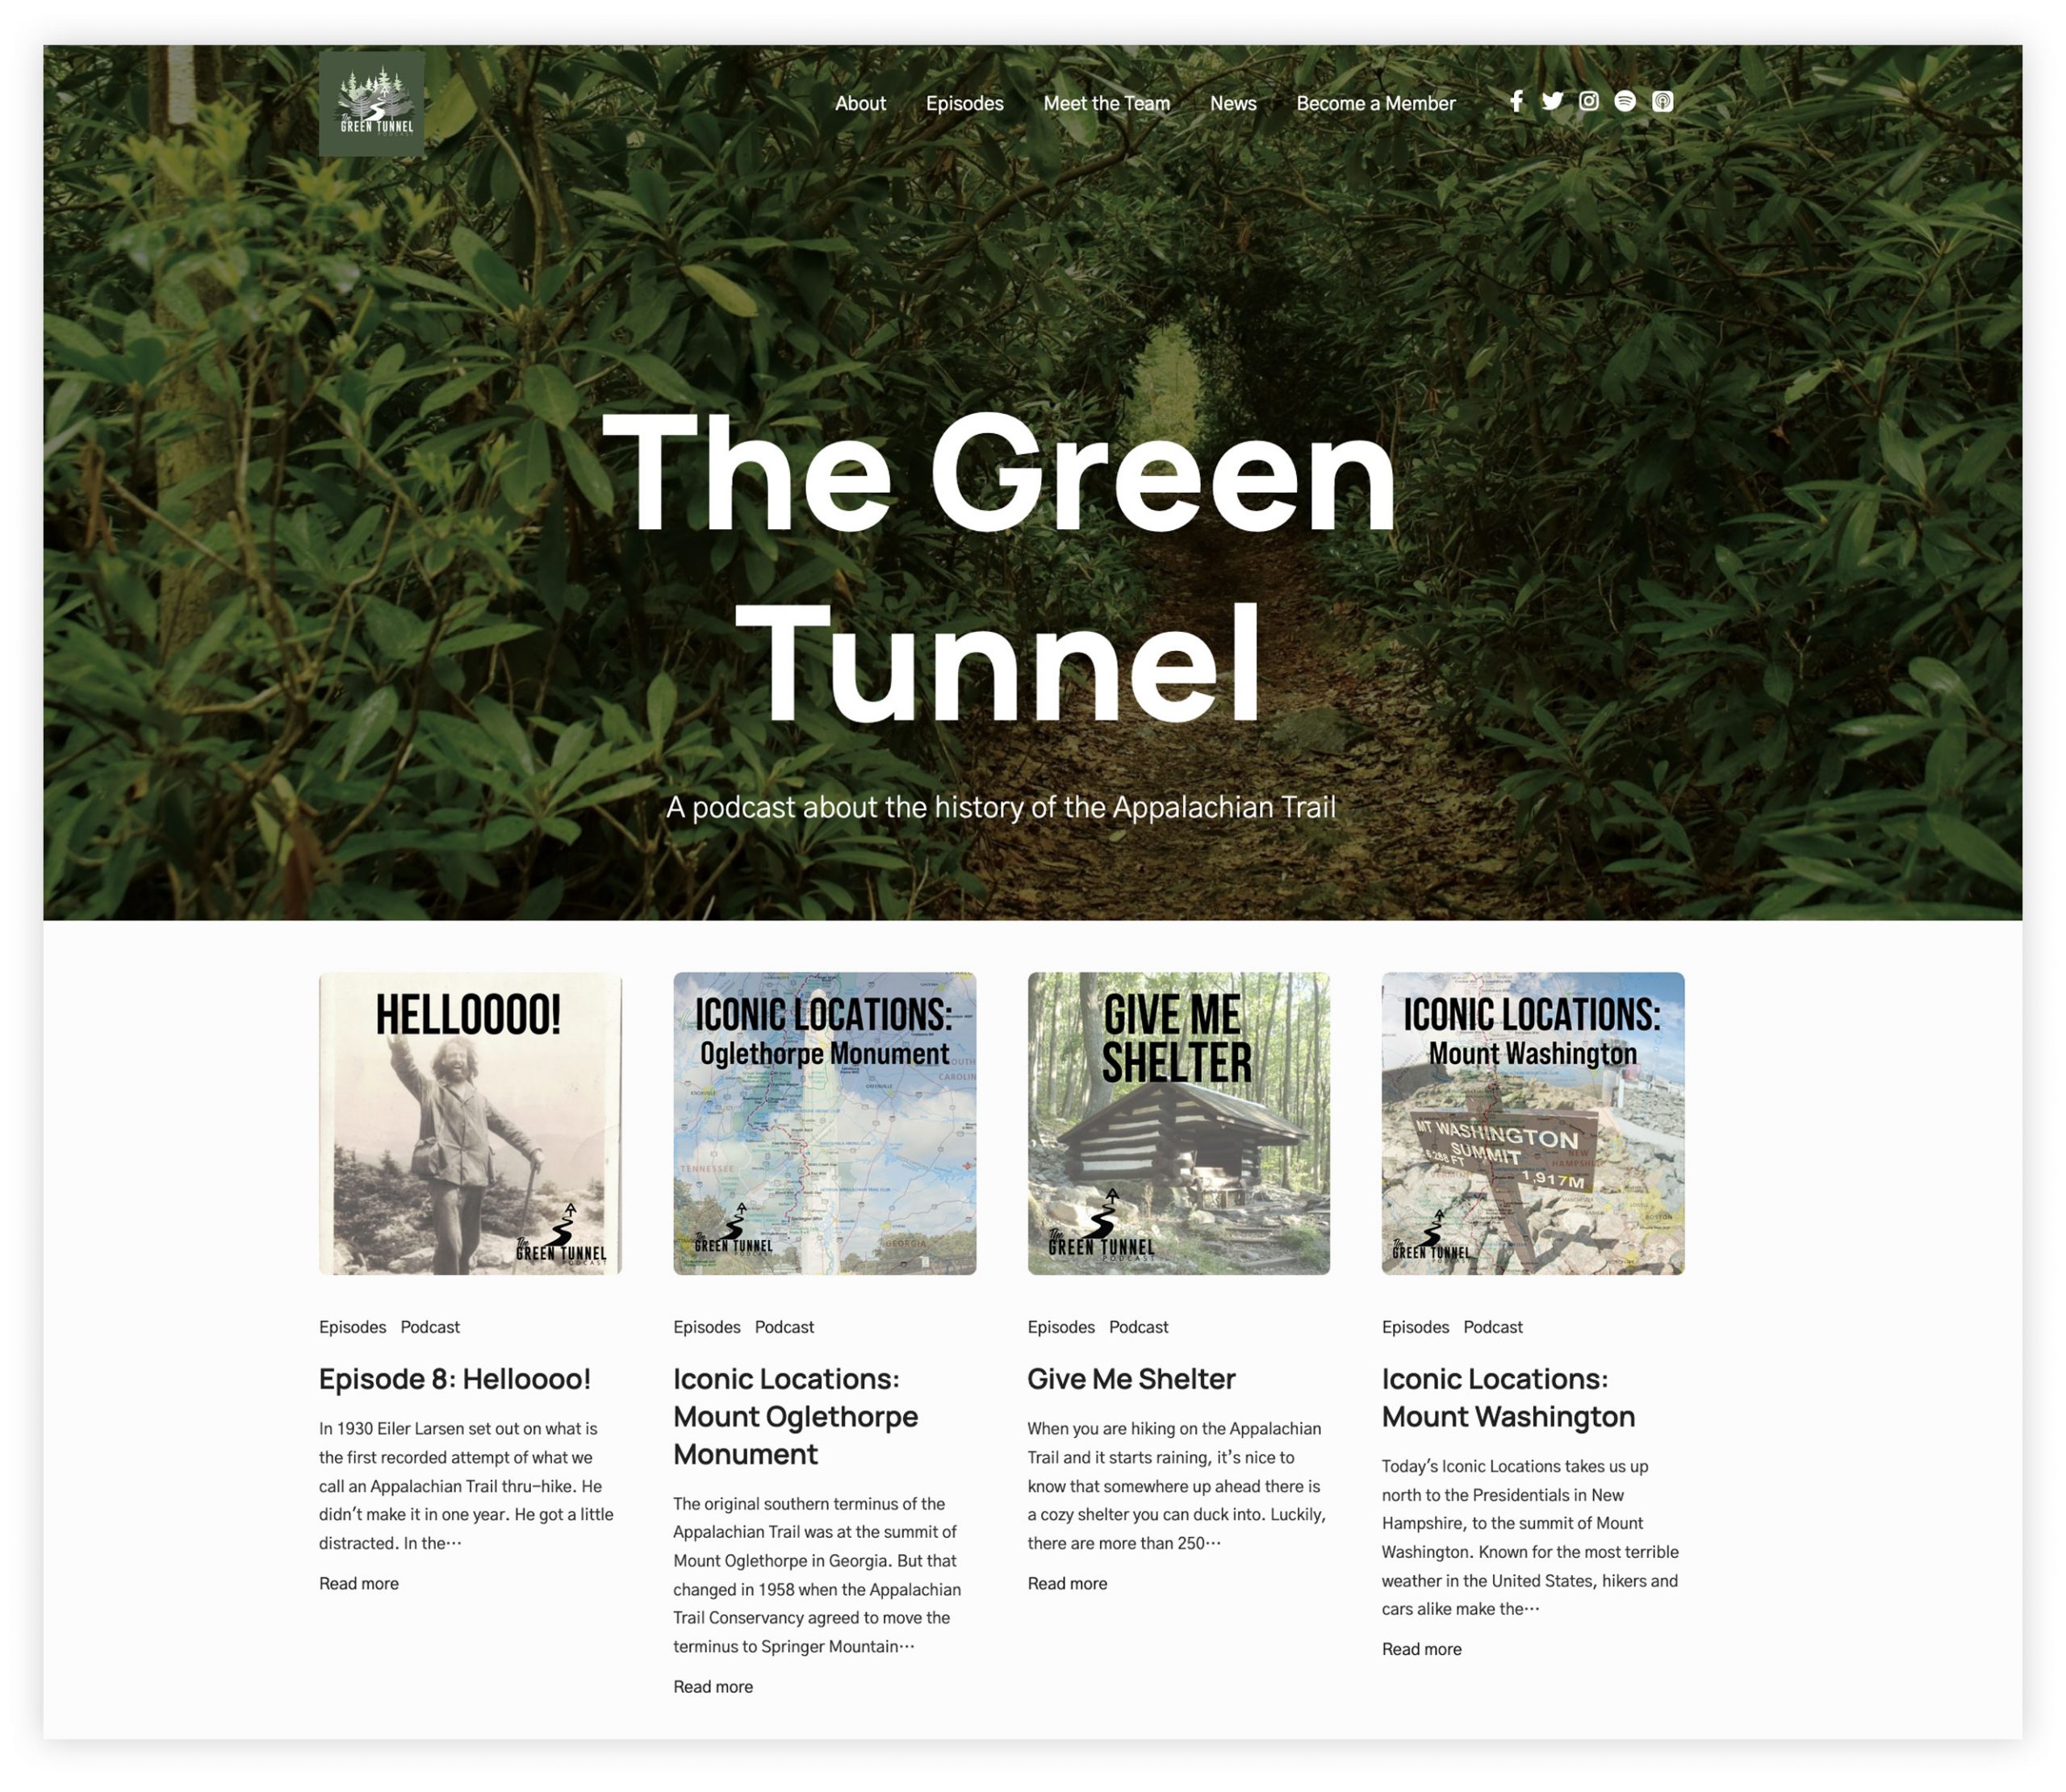 Screengrab of The Green Tunnel podcast website landing page which reads, "A podcast about the history of the Appalachian Trail."